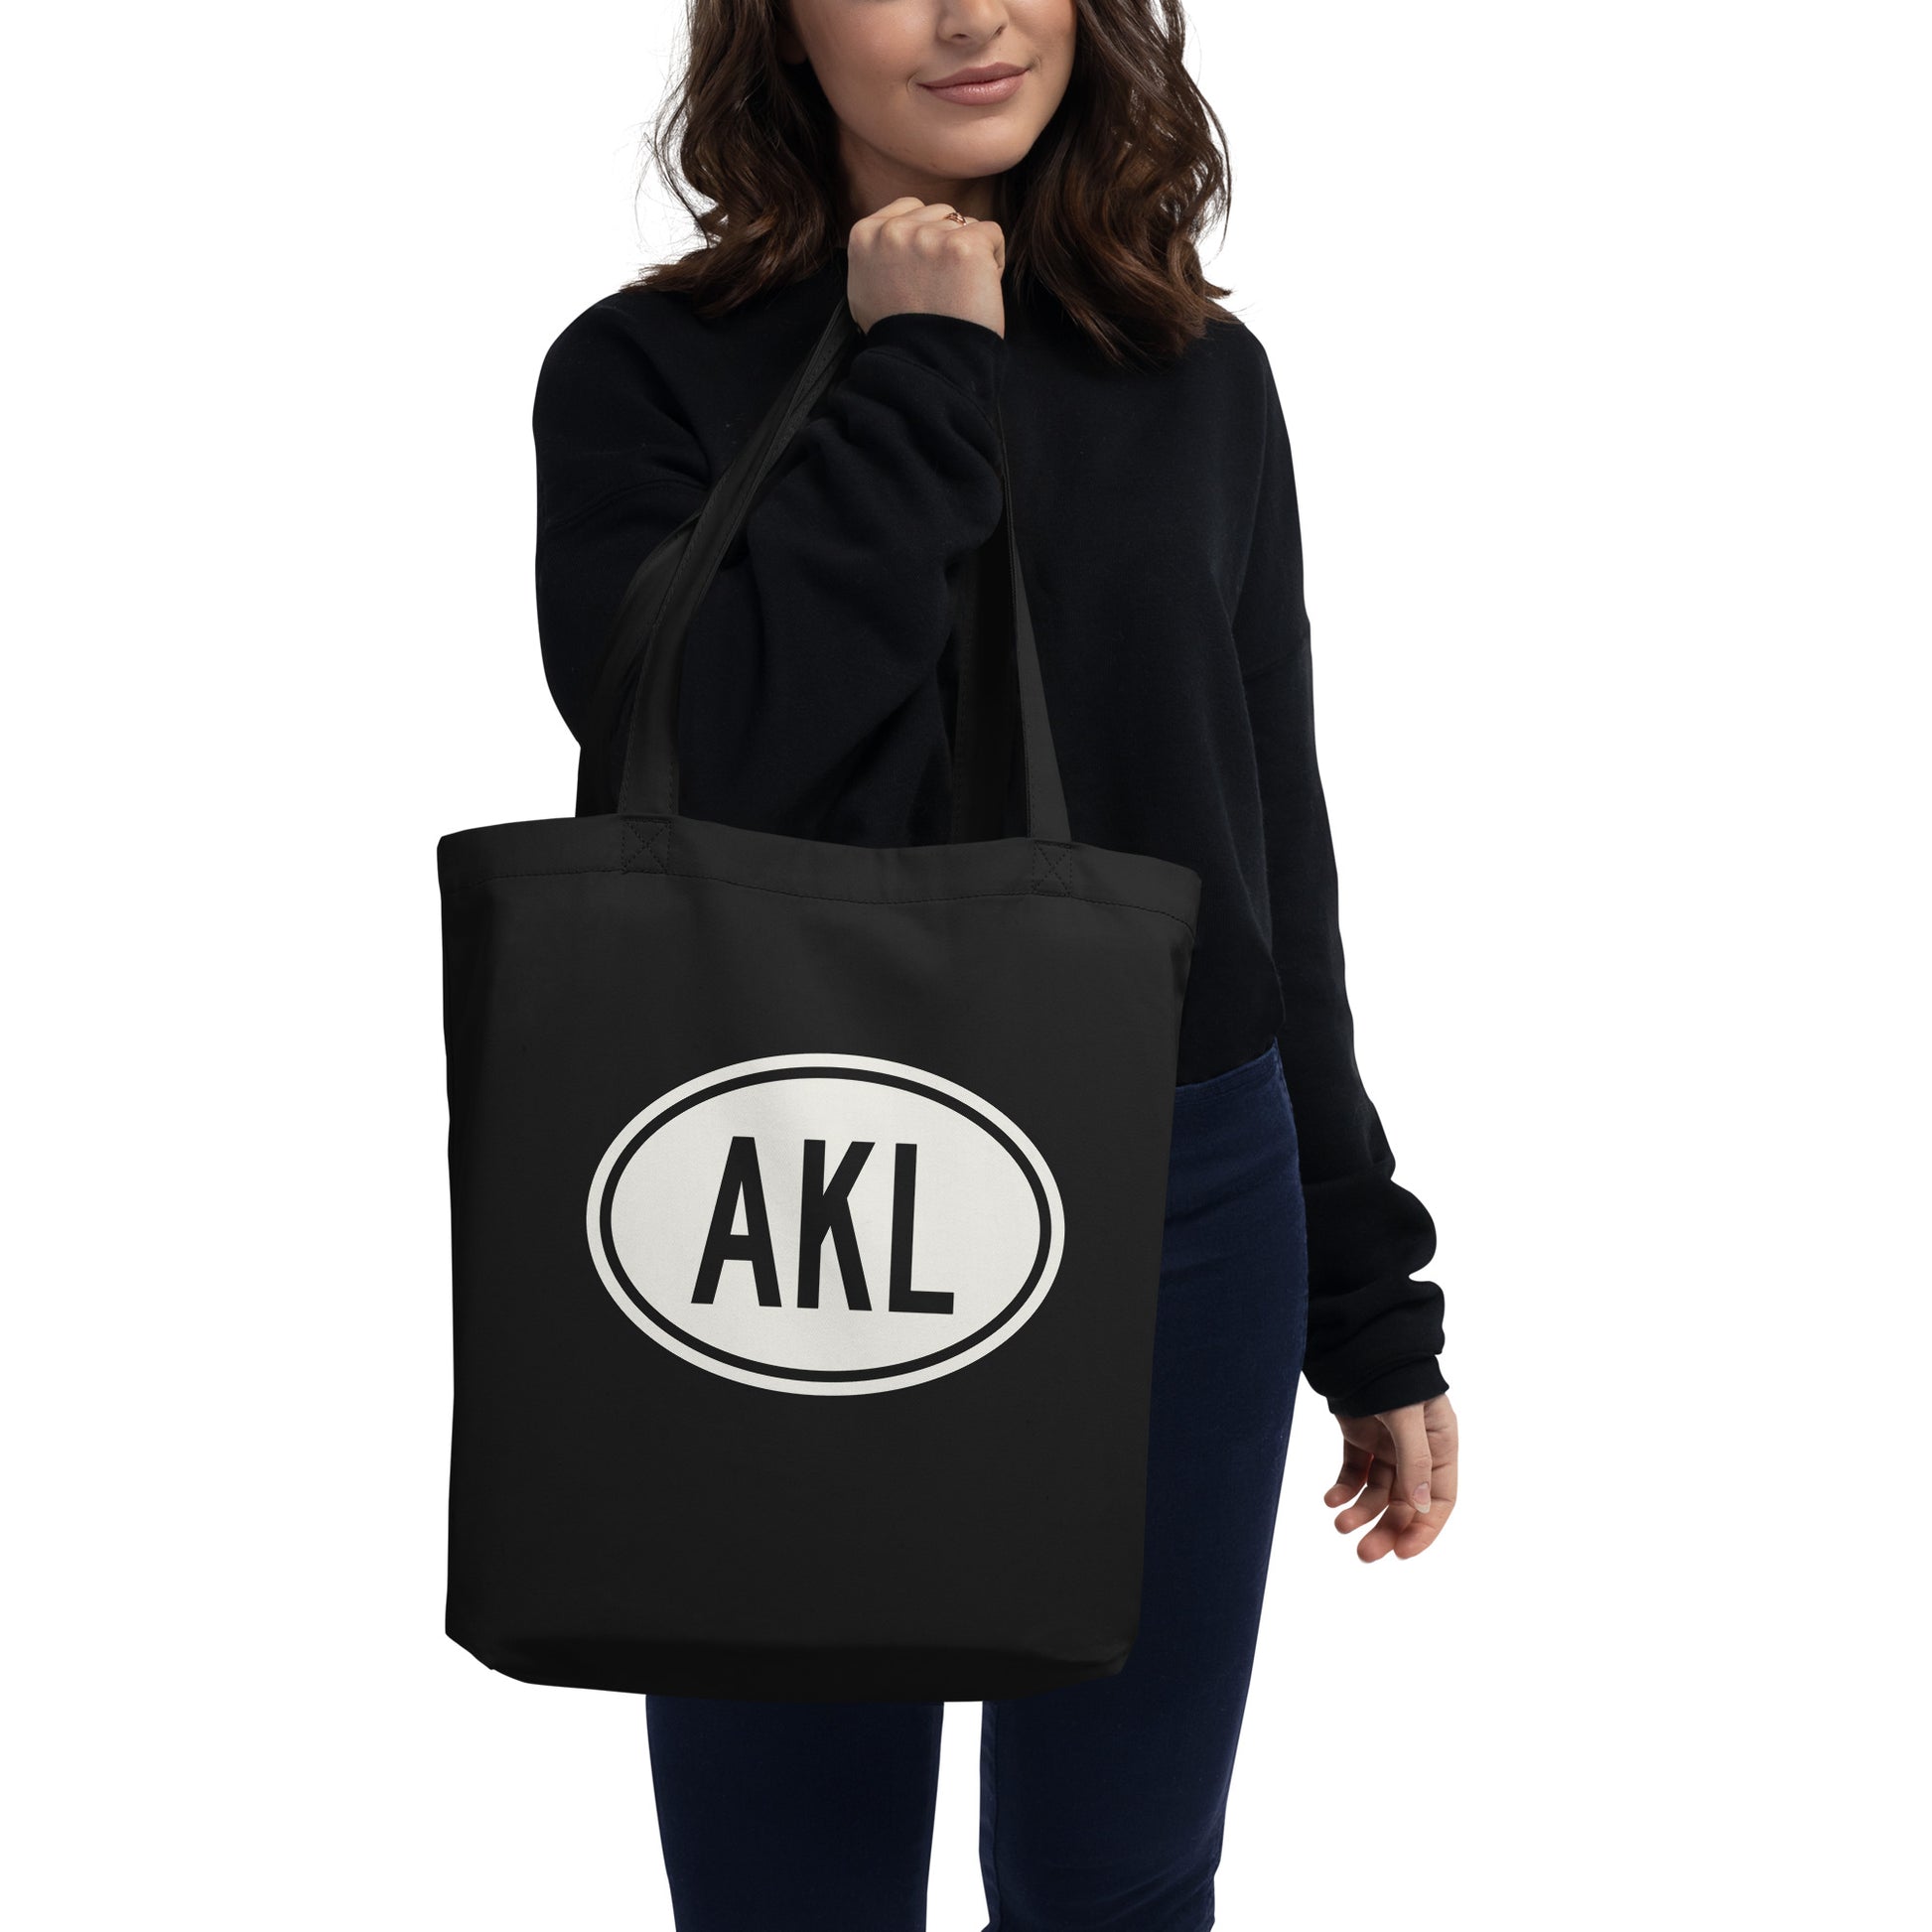 Unique Travel Gift Organic Tote - White Oval • AKL Auckland • YHM Designs - Image 03